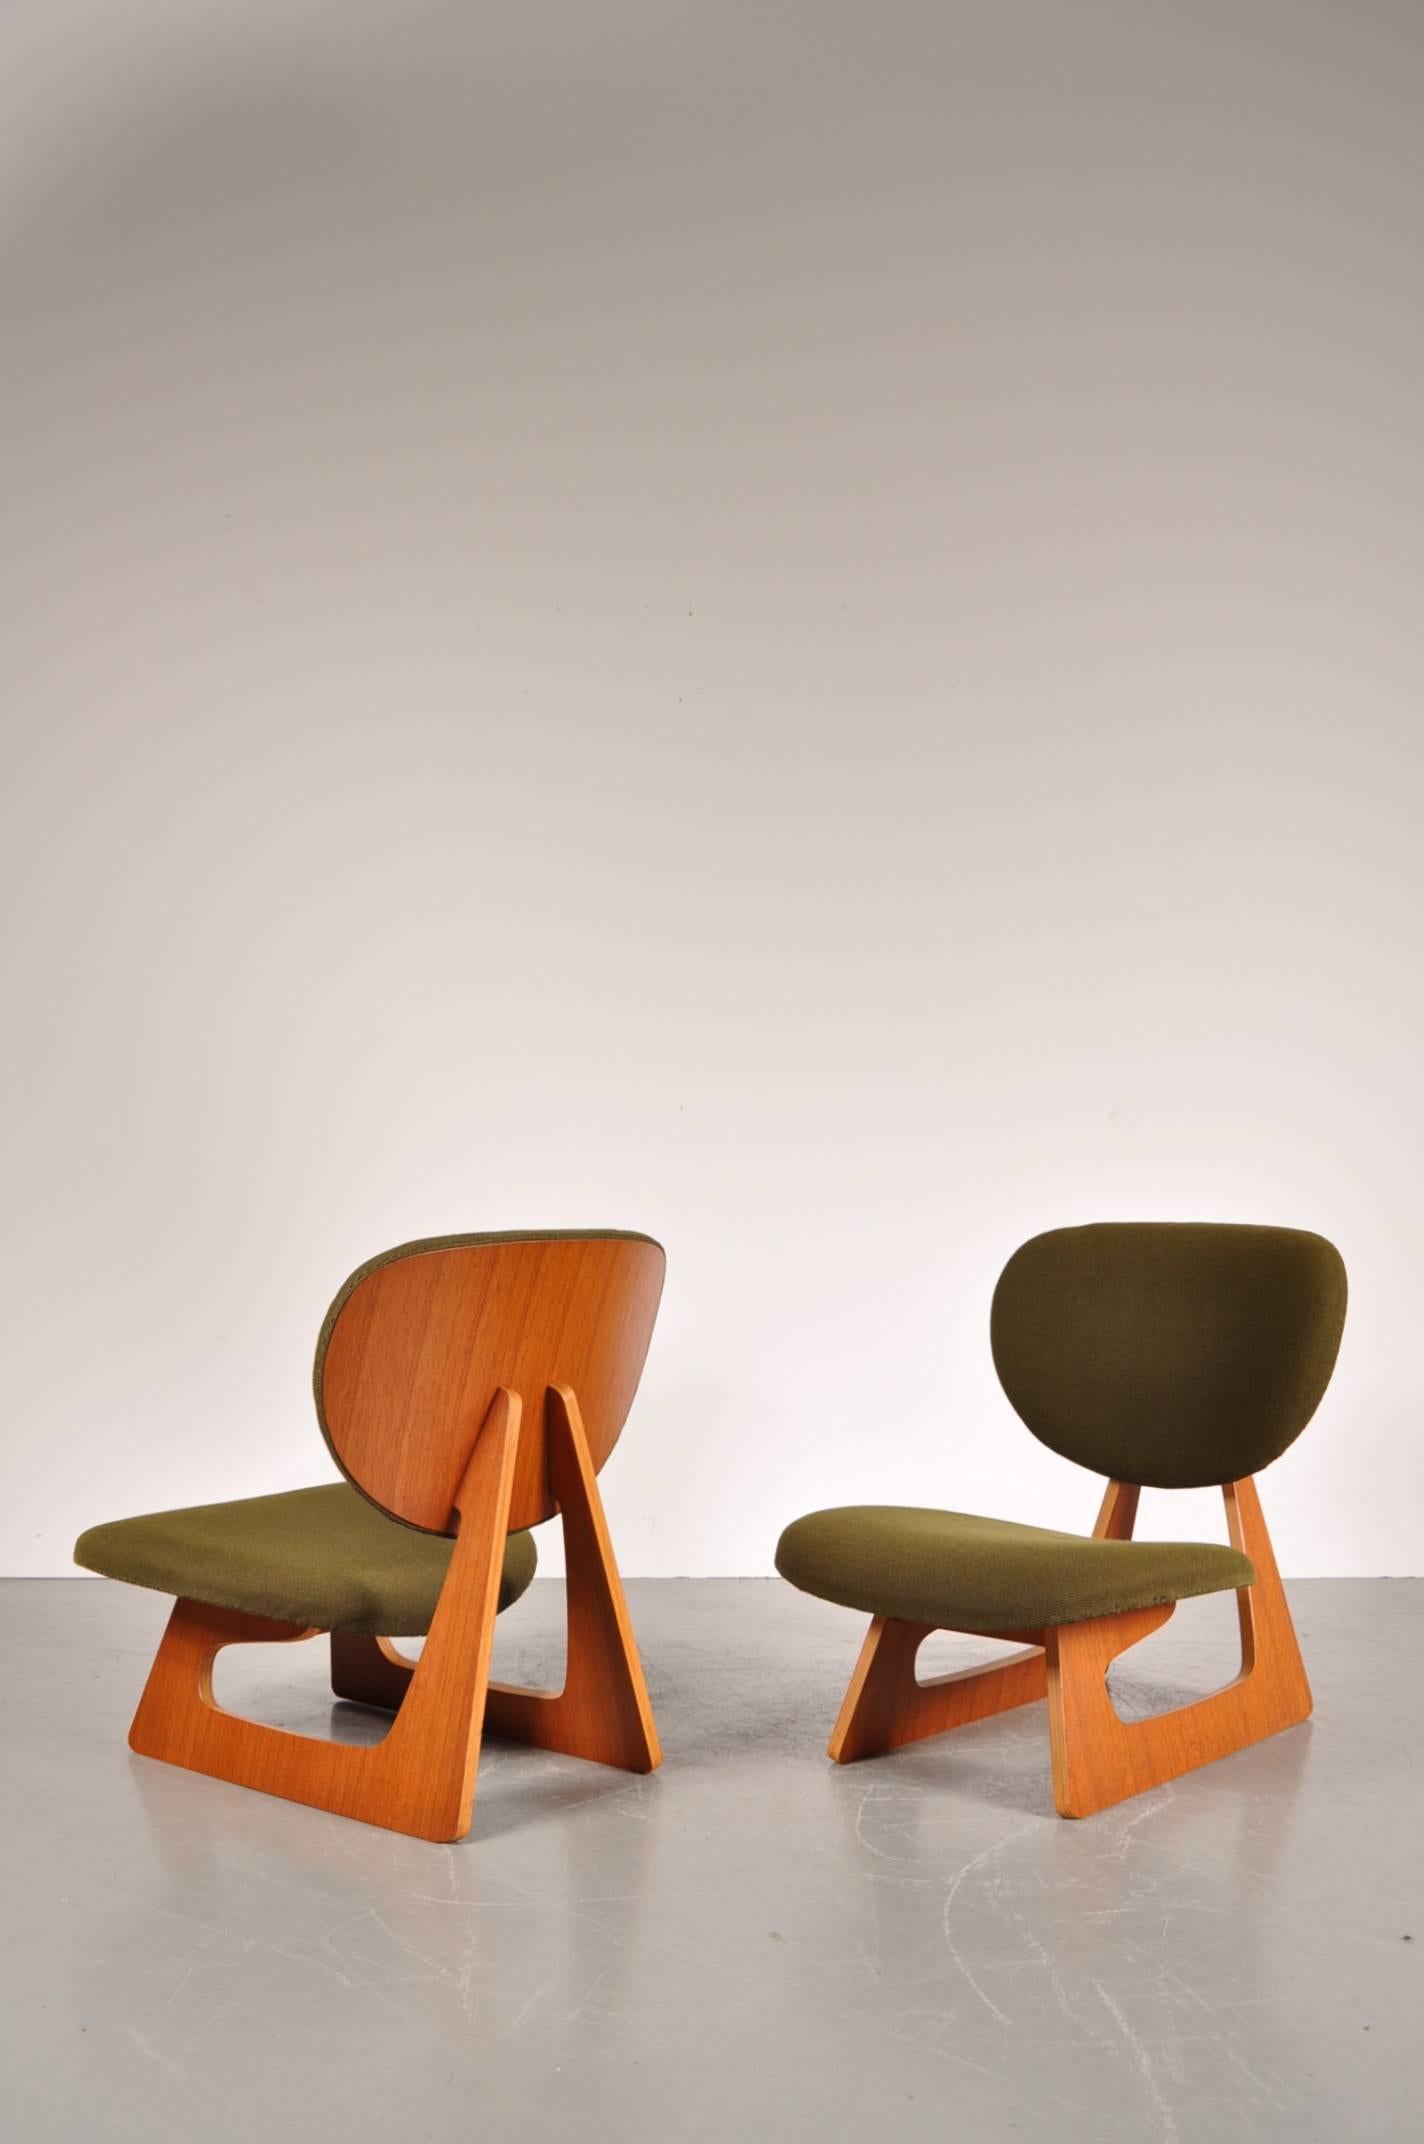 Stunning pair of teiza chairs designed by Daisaku Choh, manufactured by Tendo in Japan, circa 1960.

This chair was designed for the Japanese exhibition booth at the 12th Milano Triennale in 1960. It is the most representative chair of Choh’s